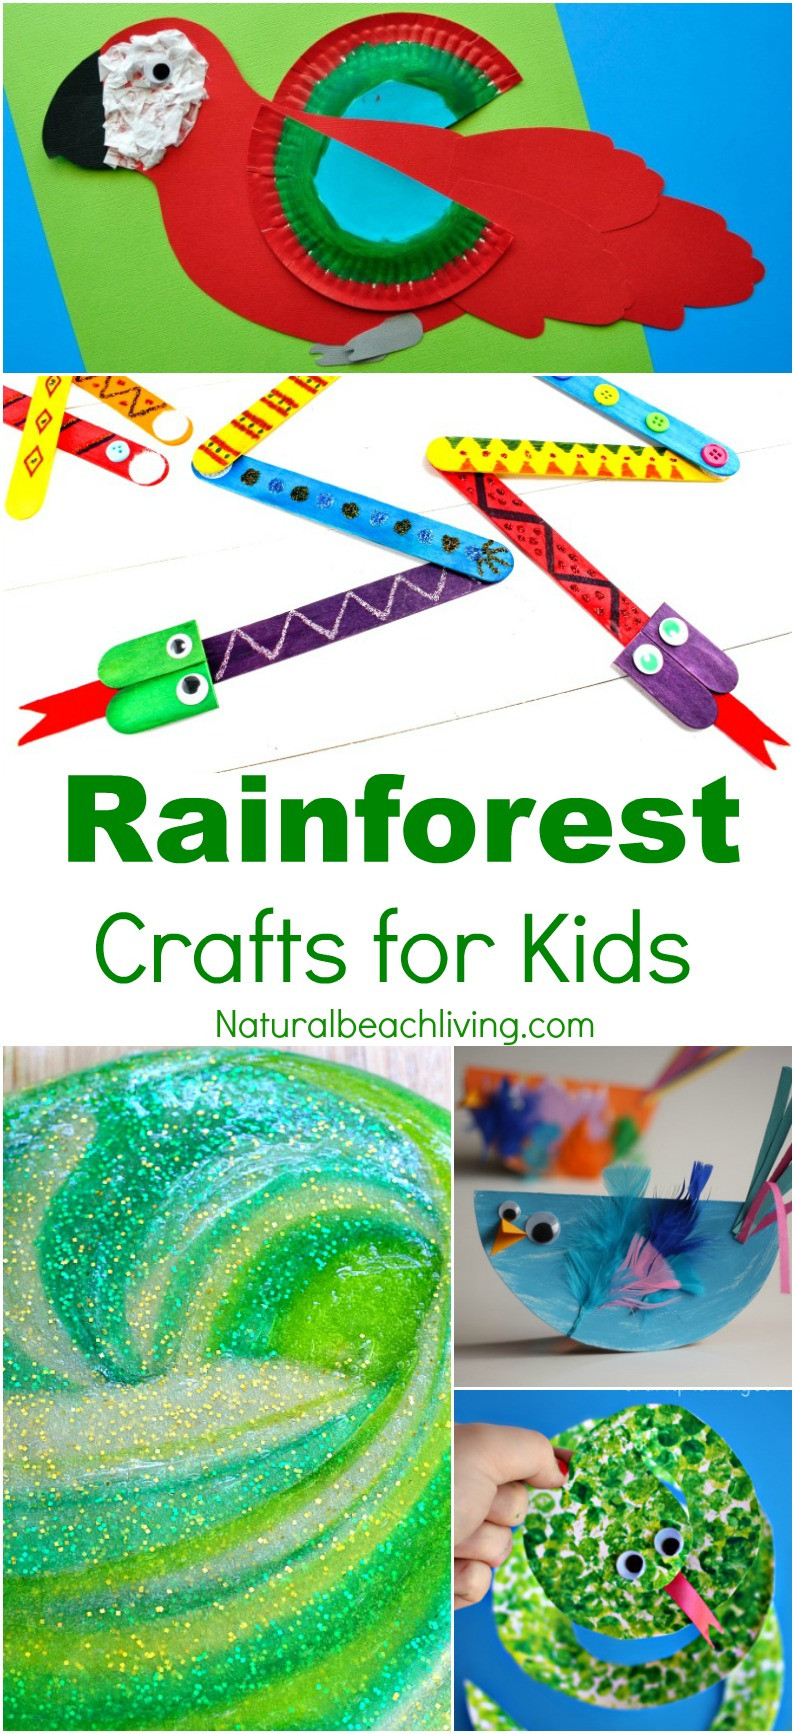 Project For Preschoolers
 10 Amazing Rainforest Crafts Kids Can Make Natural